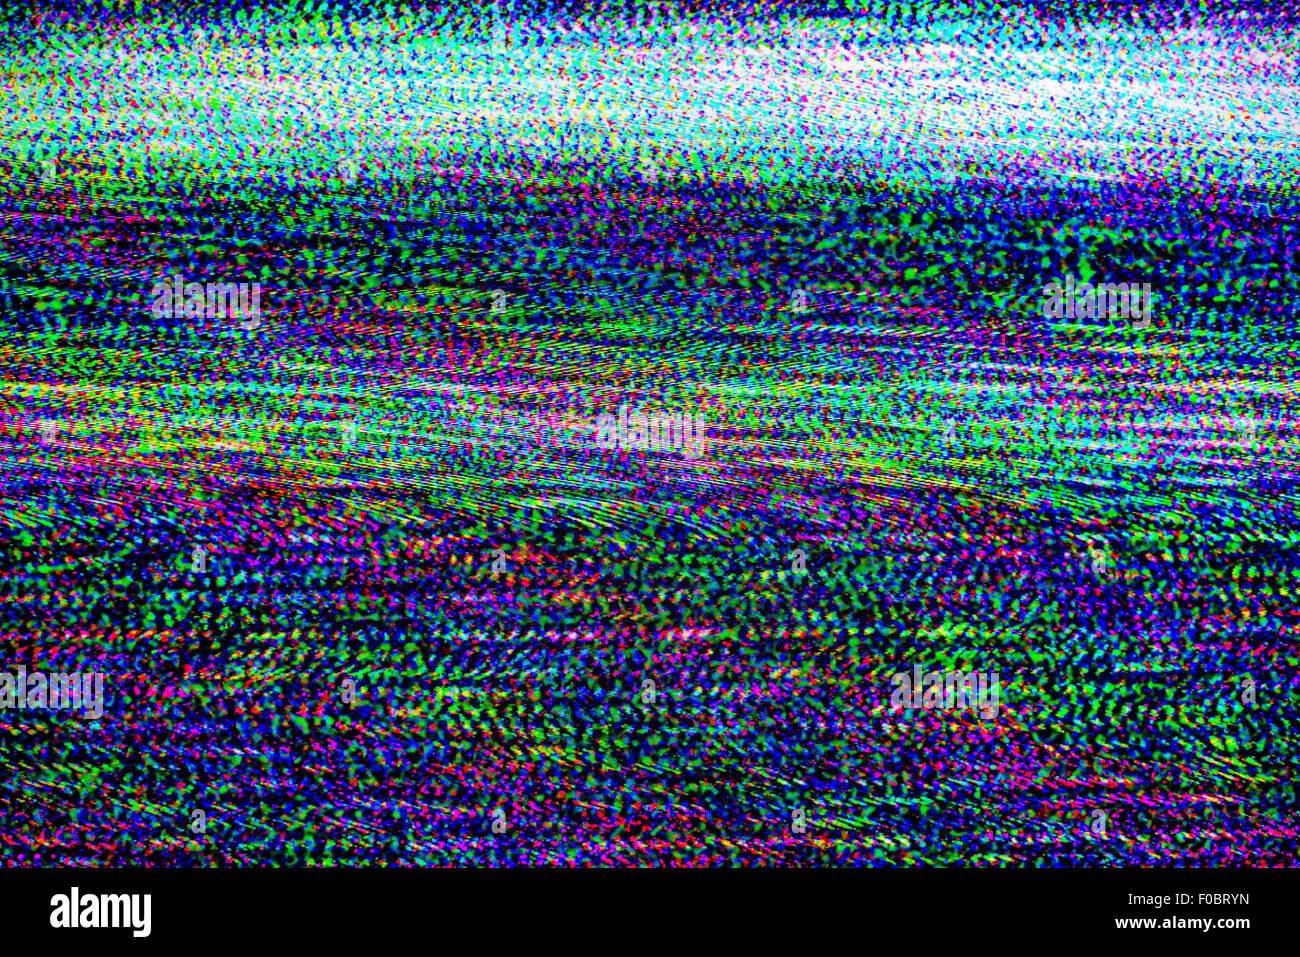 TV damage, bad sync TV channel, RGB LCD television screen with static noise from poor broadcast signal reception Stock Photo